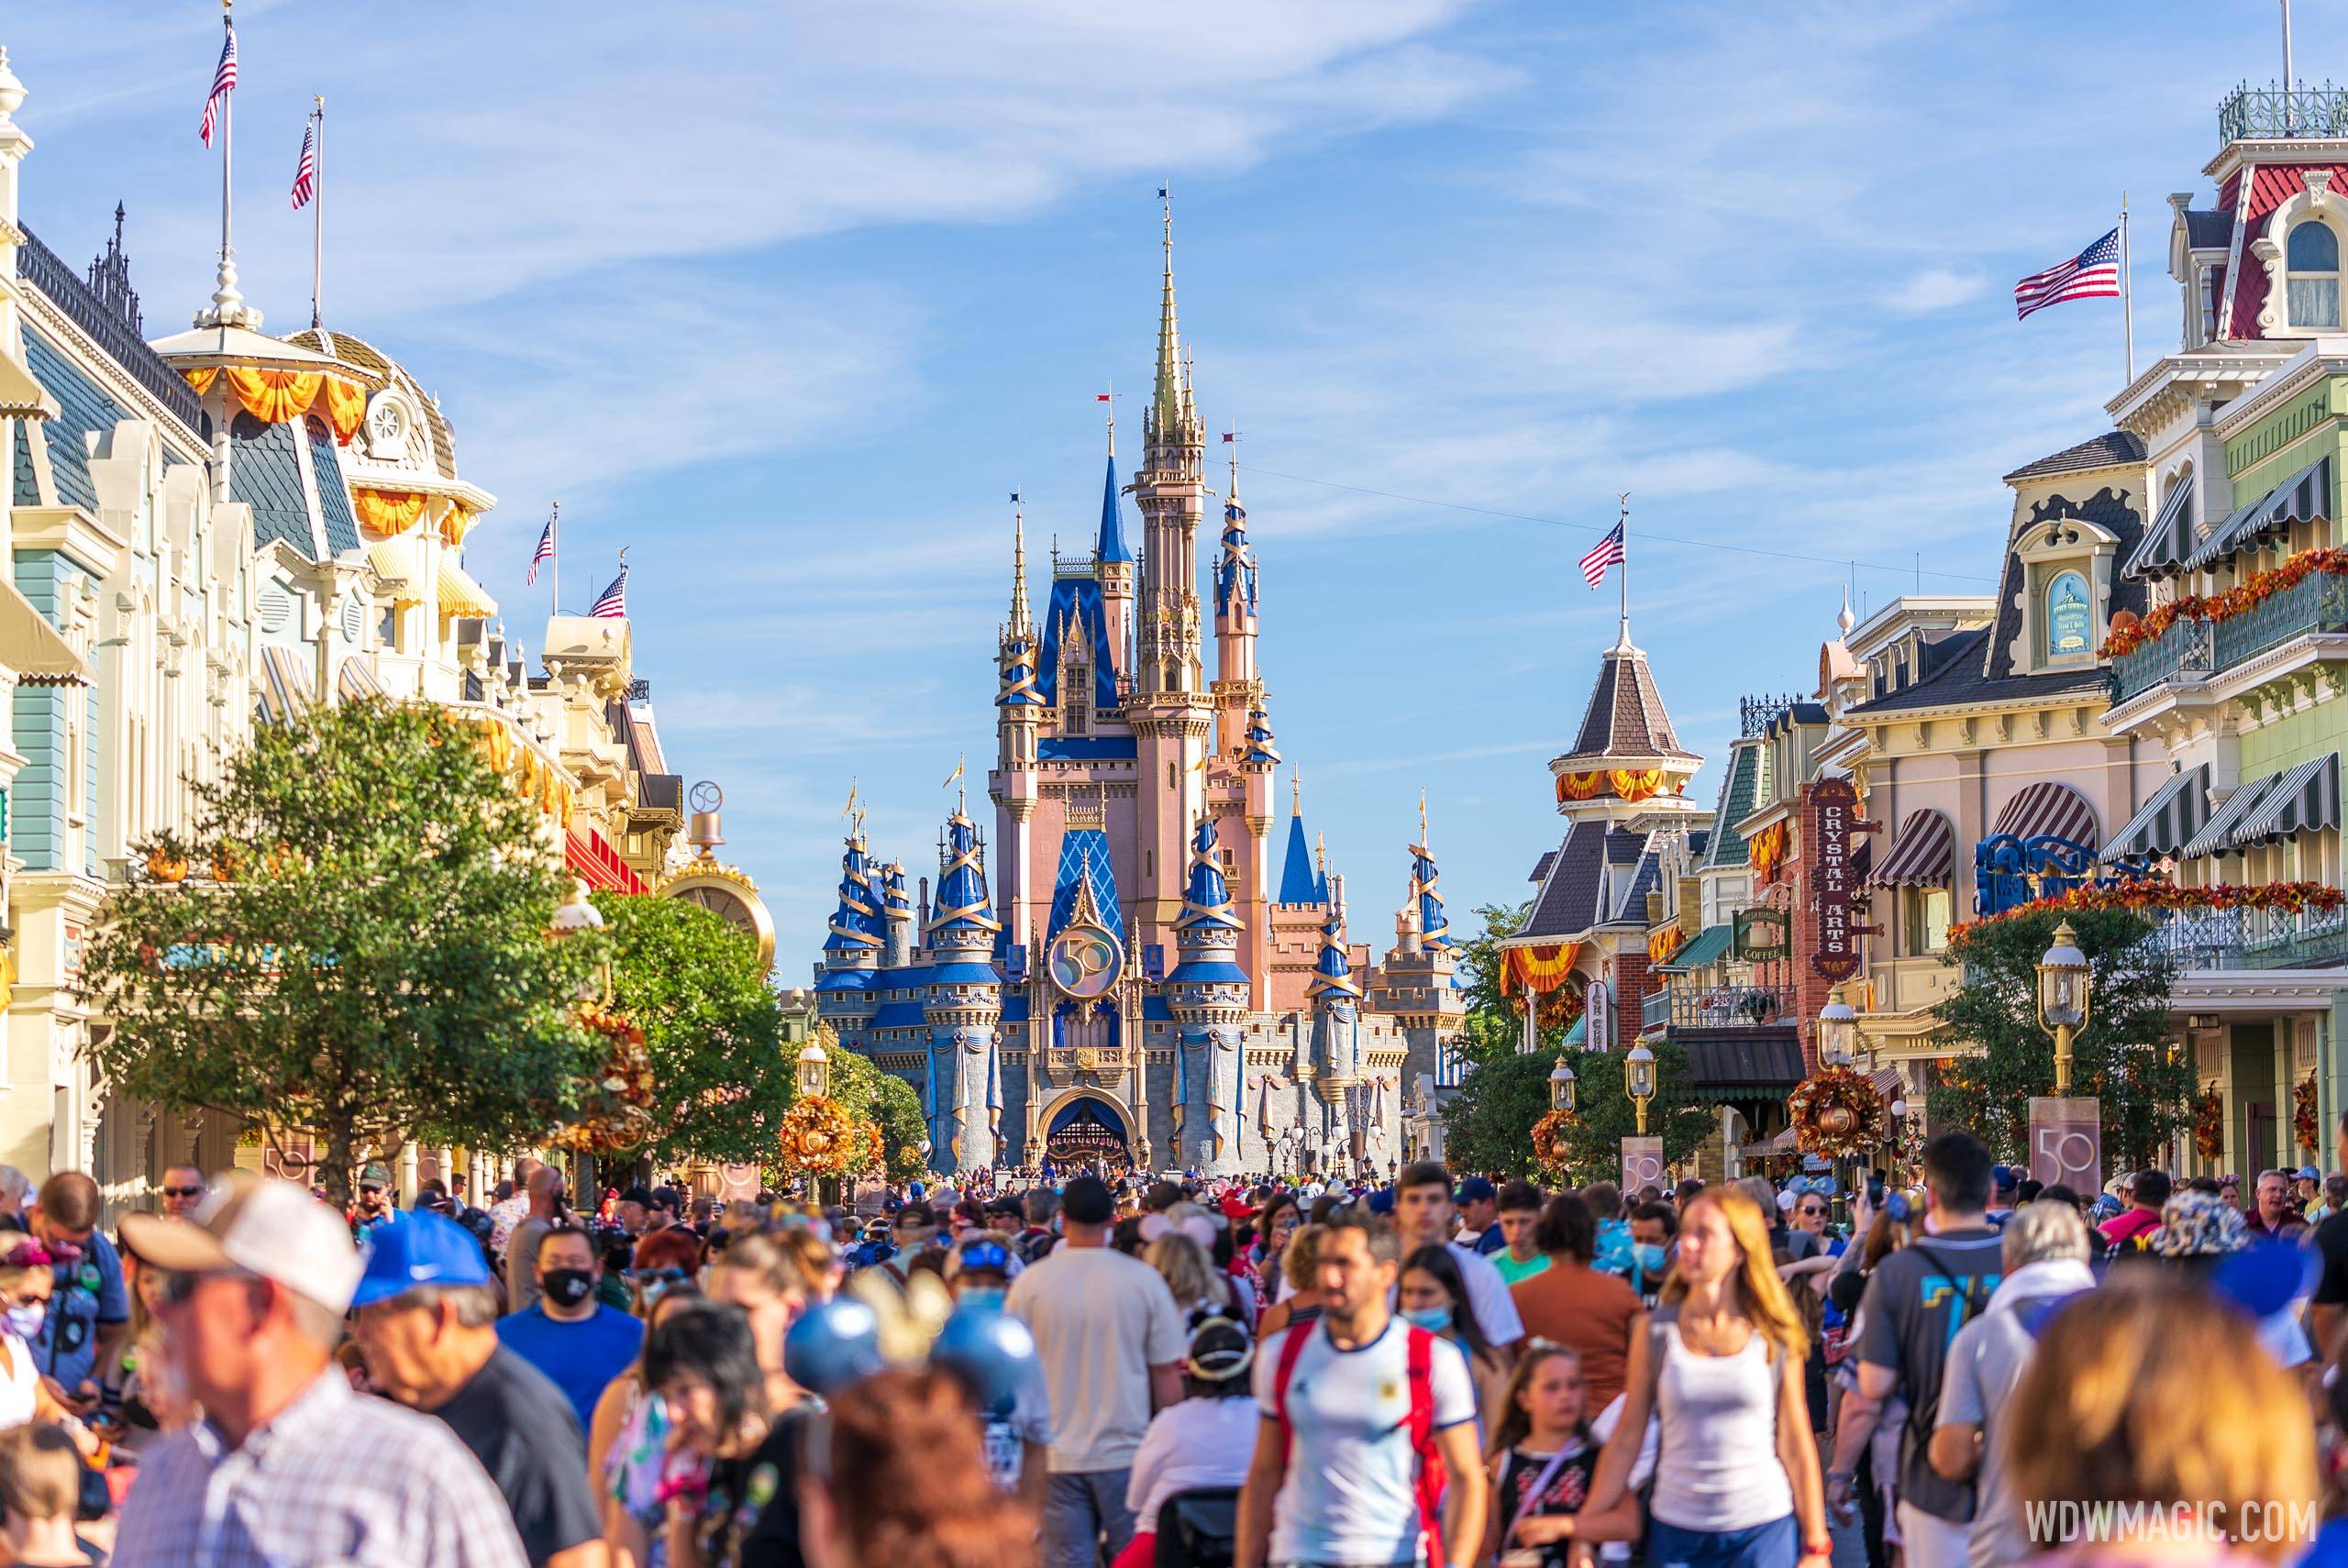 Guests planning a trip at the end of January should plan around an early Magic Kingdom close